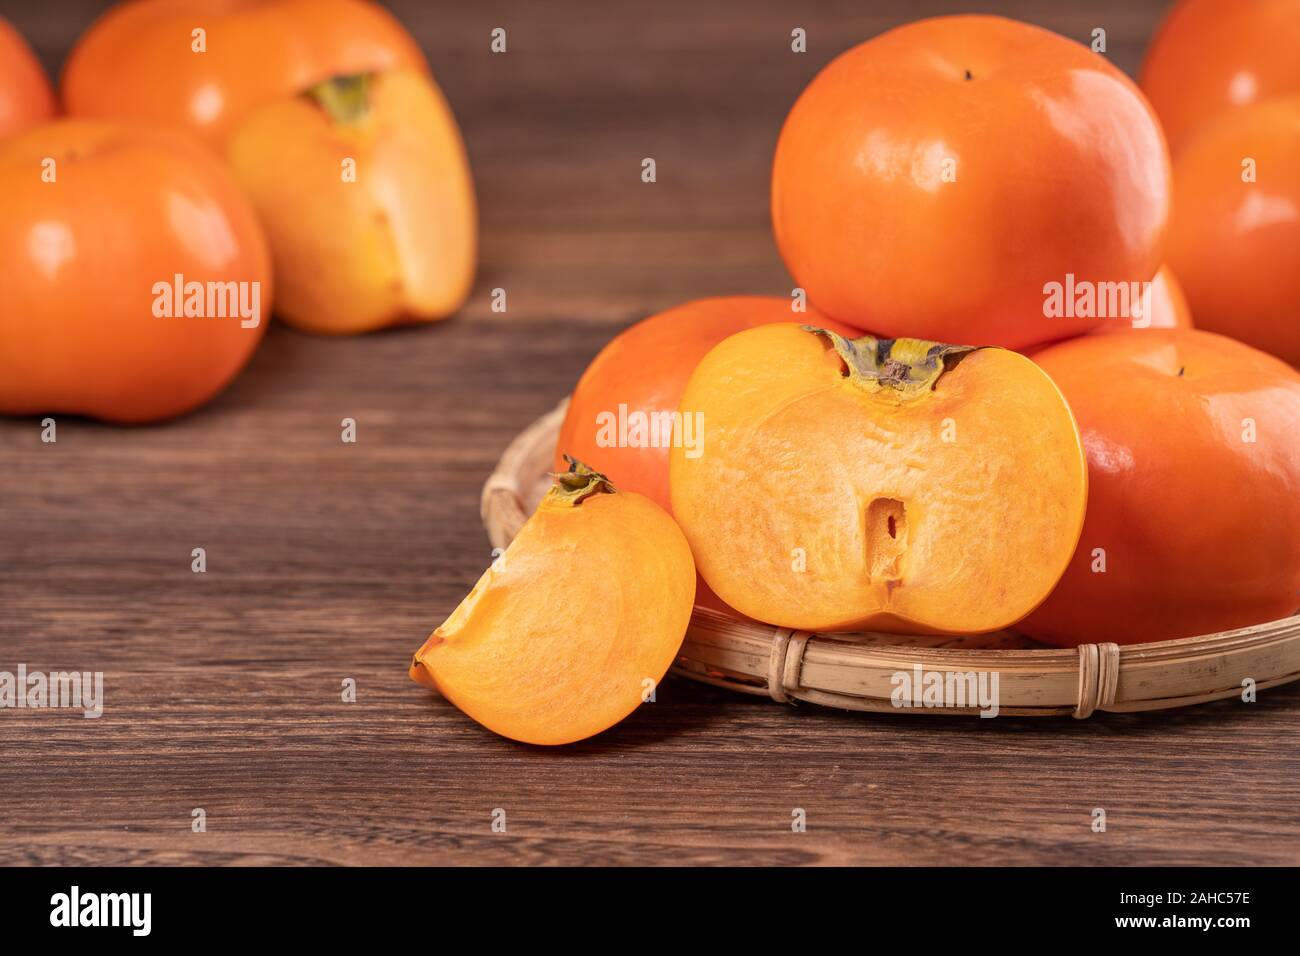 Fresh, beautiful orange color persimmon kaki on bamboo sieve over dark wooden table. Seasonal, traditional fruit of Chinese lunar new year, close up. Stock Photo